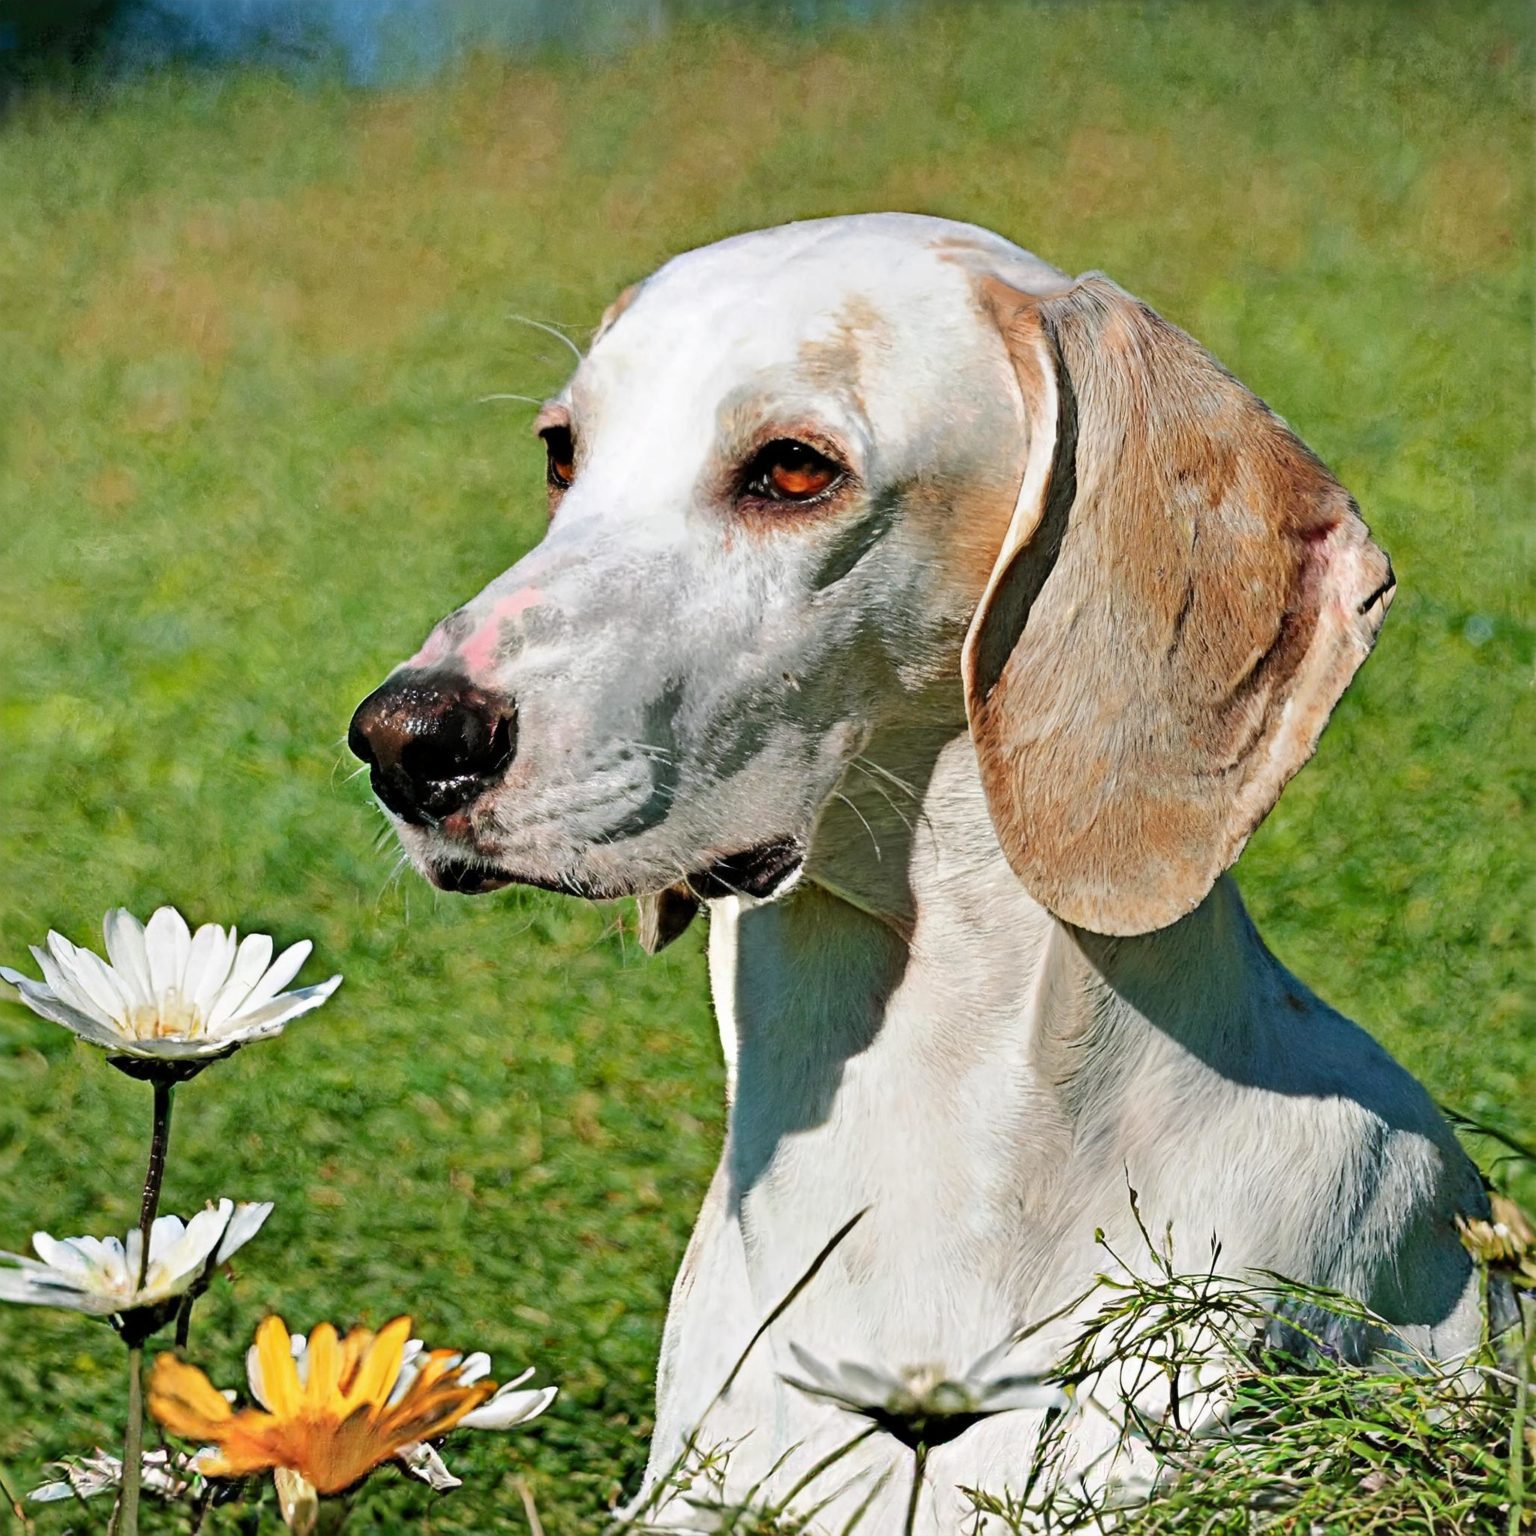 The Billy is a large hound-type breed that originated in France. The breed was created by a Frenchman named Gaston Hublot du Rivault in the 19th century, and was named after his home, Château de Billy, in Poitou. Billy dogs were initially bred to hunt in packs for large game such as deer and wild boar.